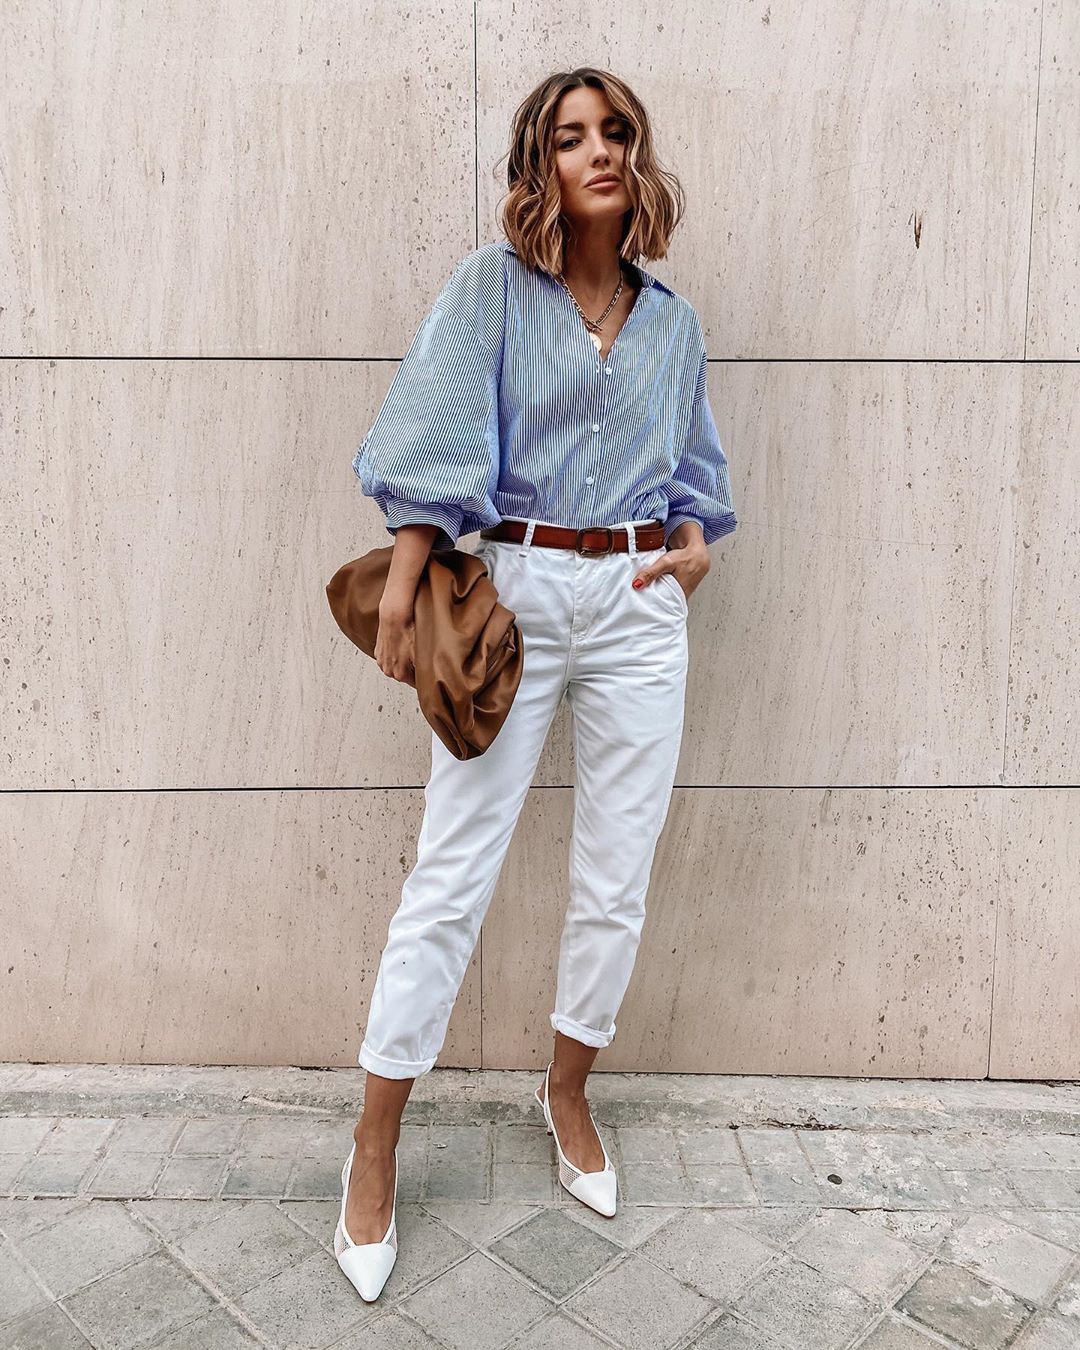 We Love This Simple, Classic Outfit Idea